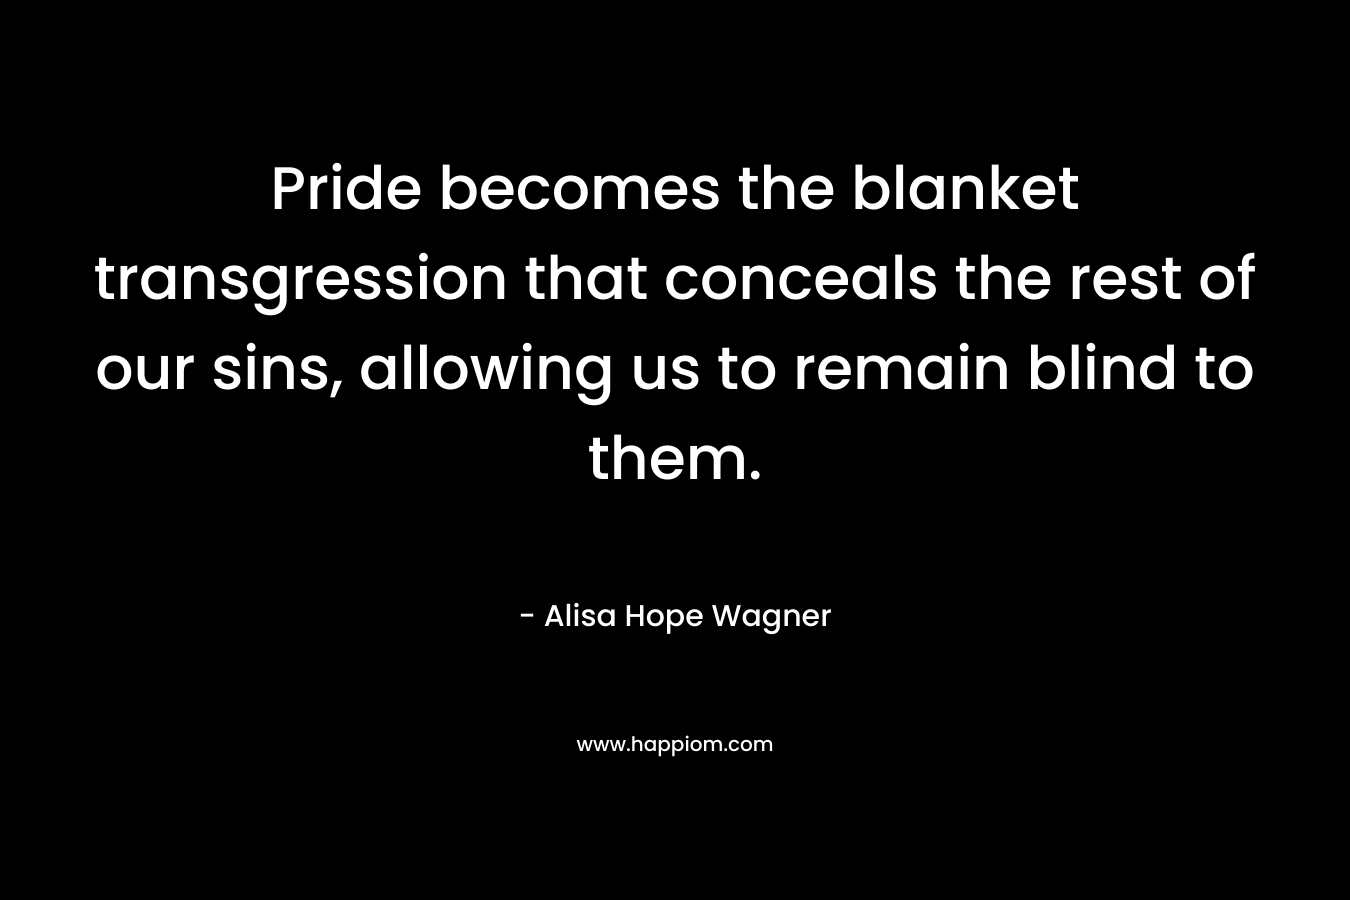 Pride becomes the blanket transgression that conceals the rest of our sins, allowing us to remain blind to them. – Alisa Hope Wagner